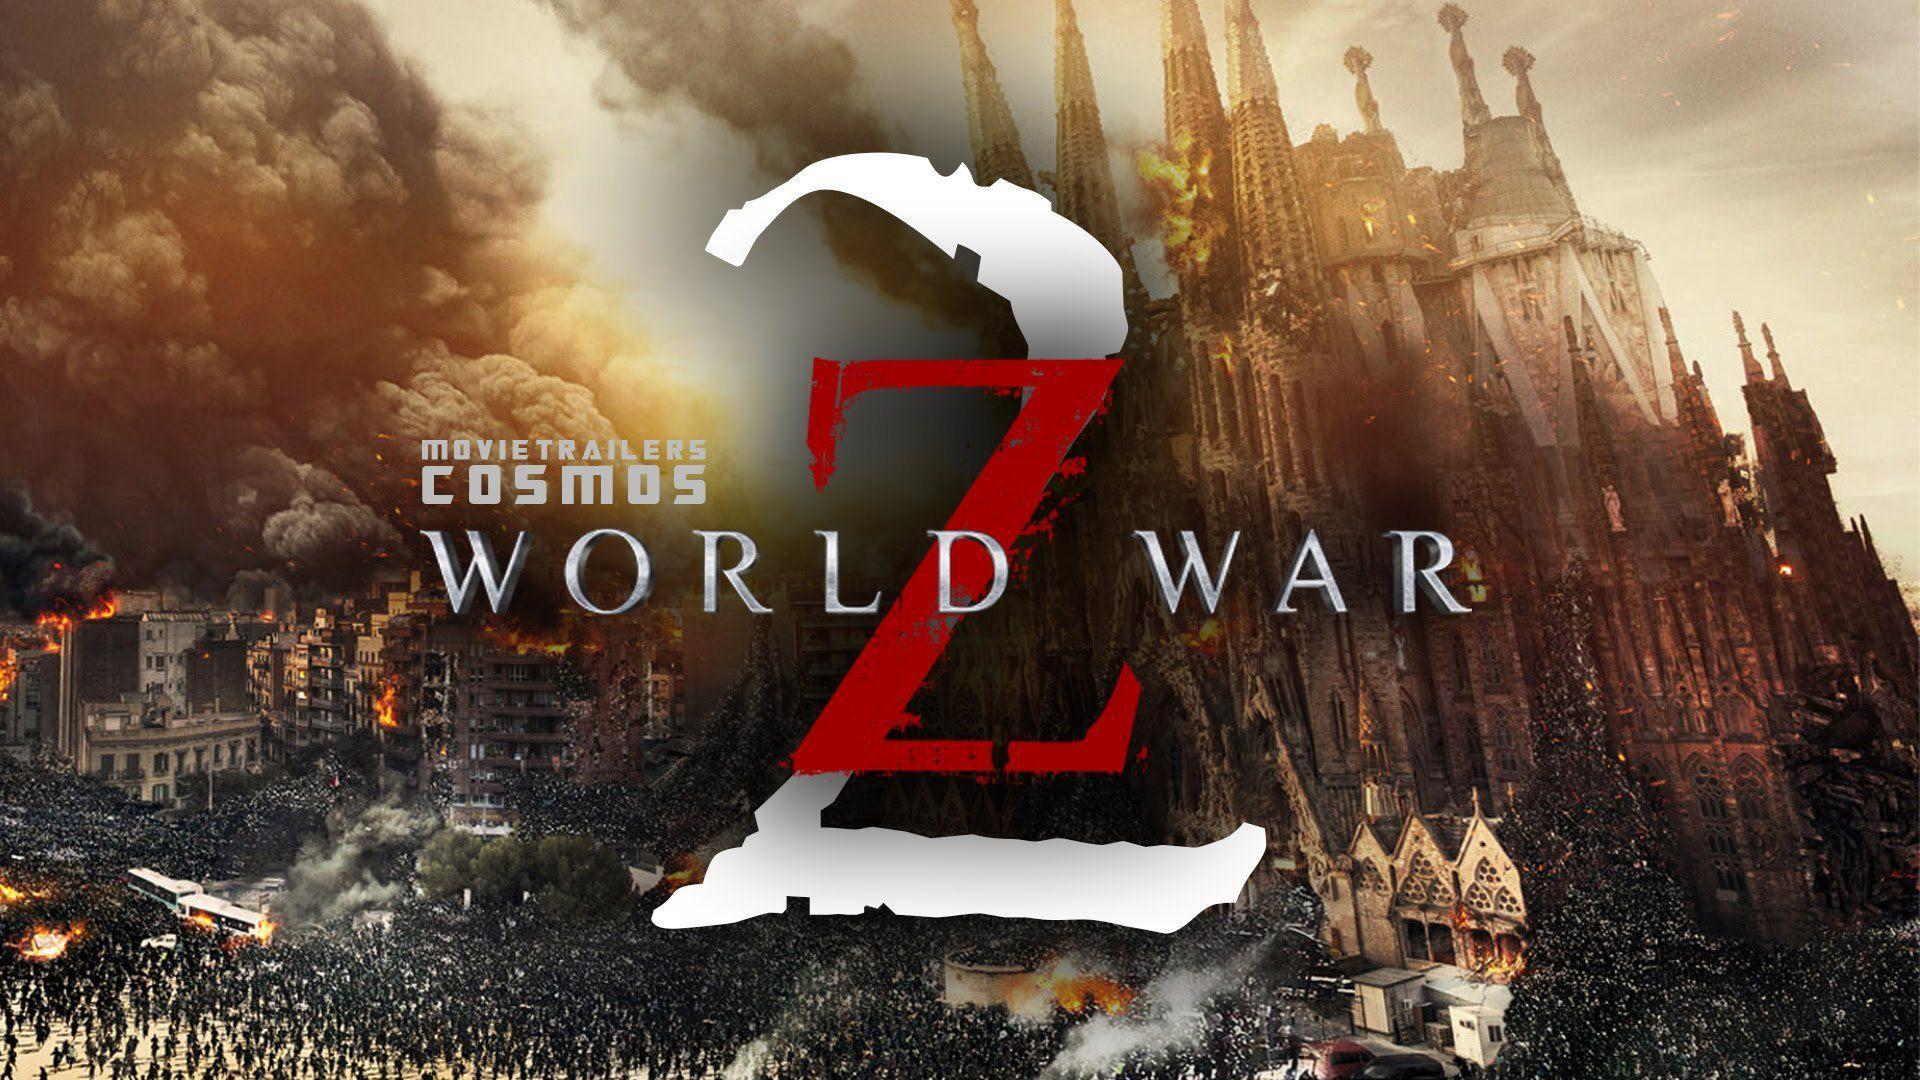 World War Z 2 Wallpaper Image Photo Picture Background